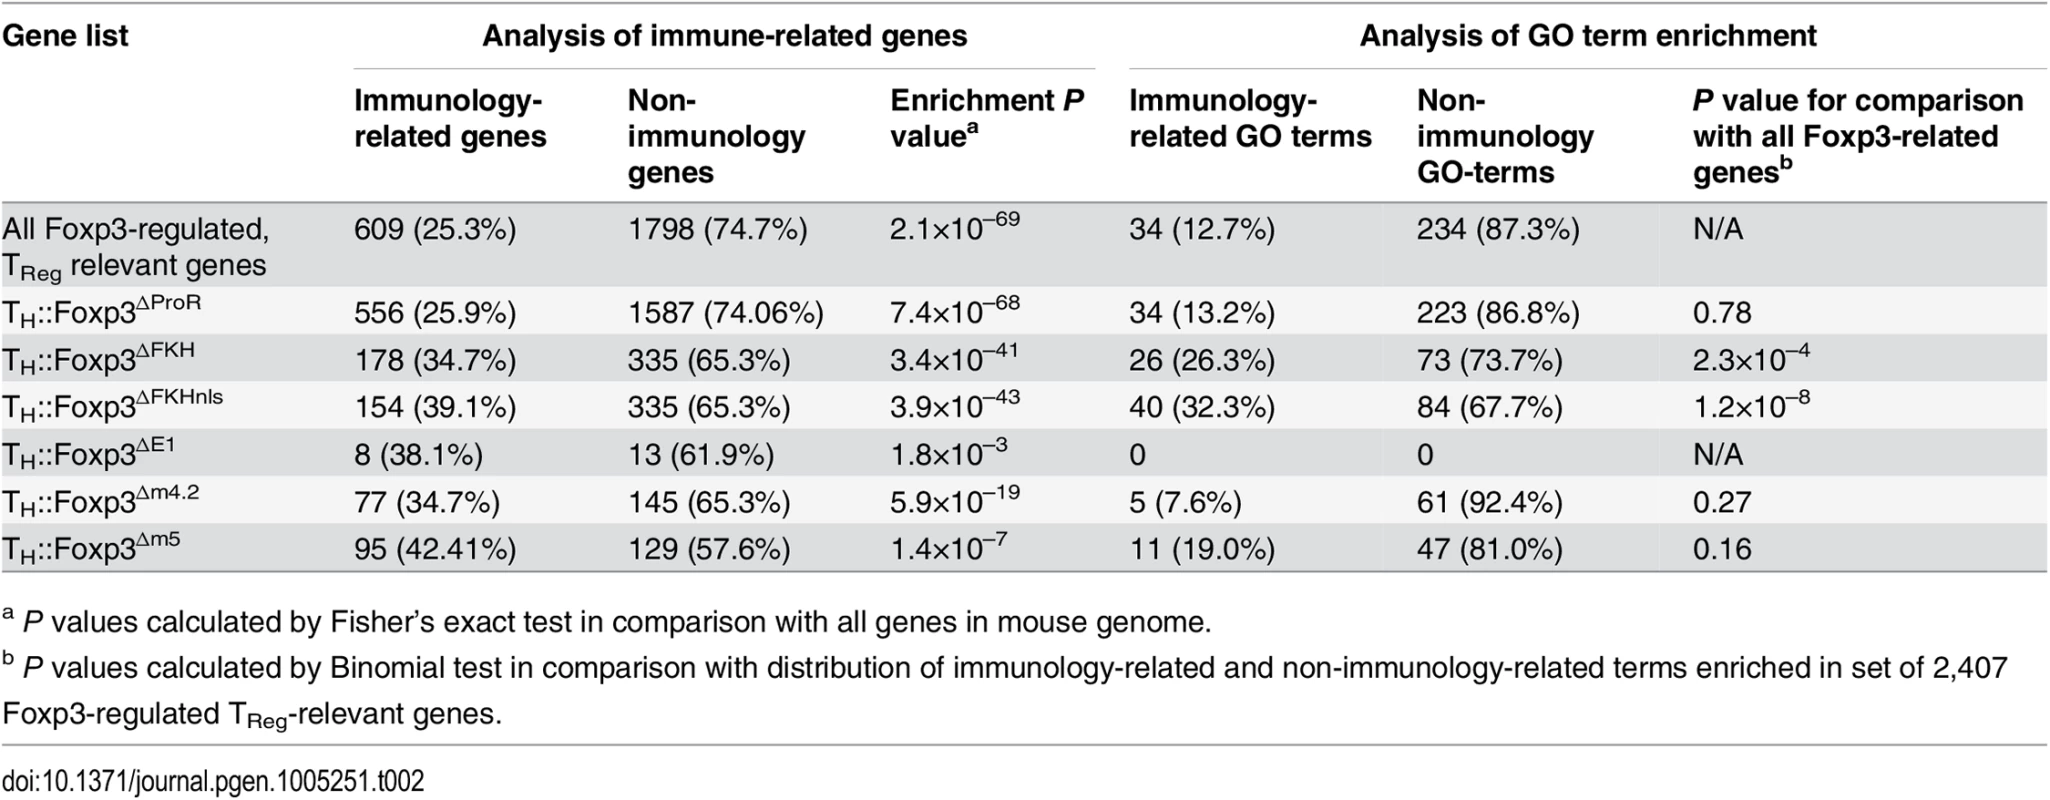 Analysis of immunology-related genes and enriched GO terms within gene lists.